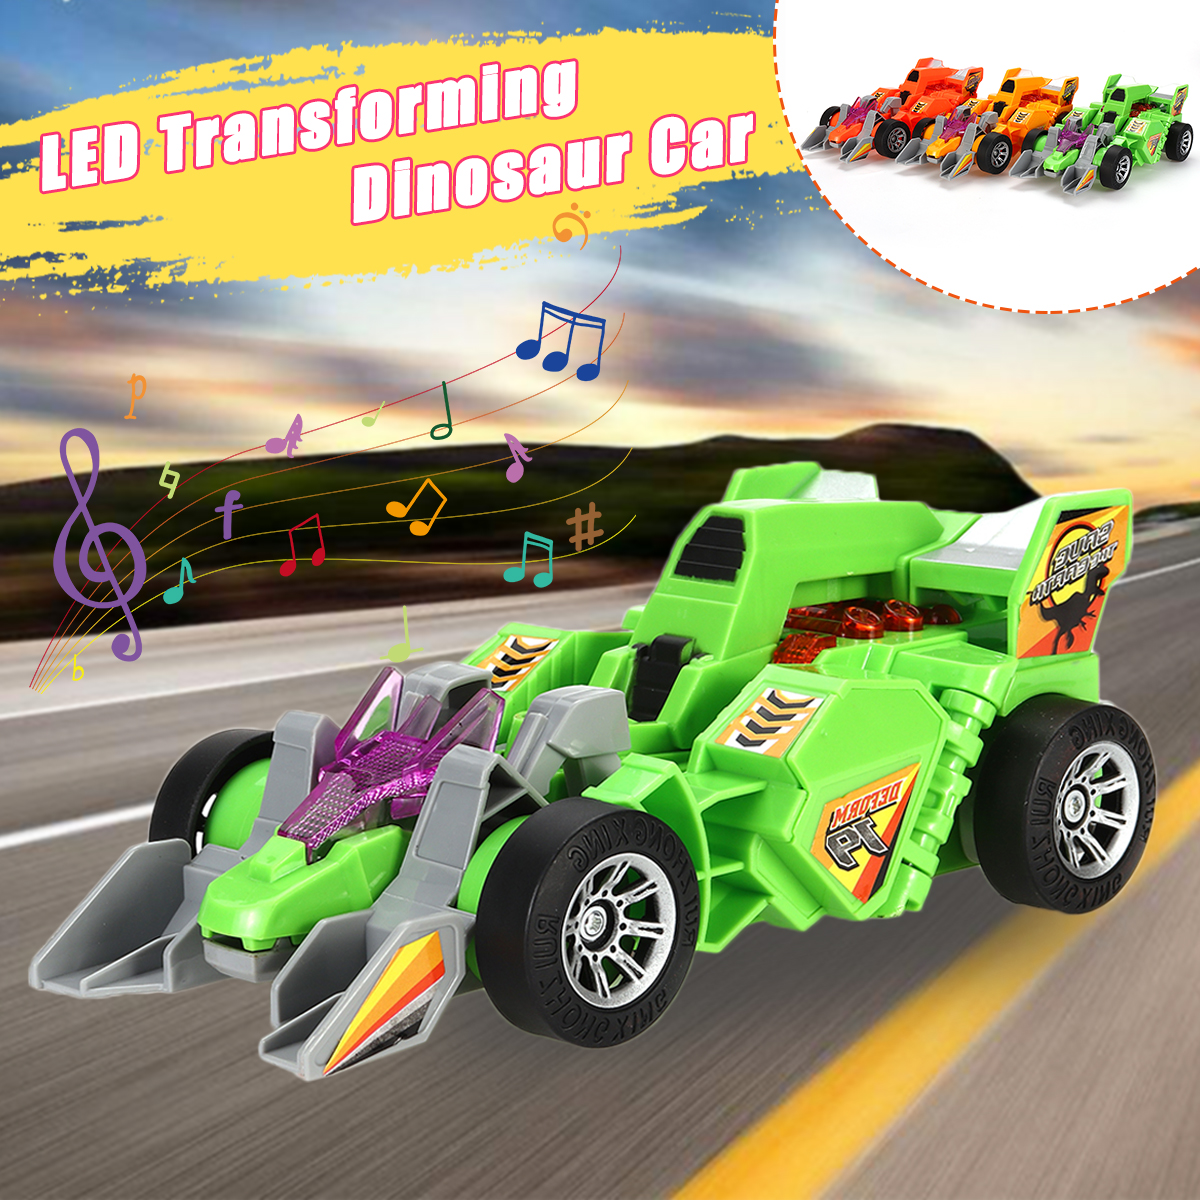 Electric-Transforming-T-Rex-Dinosaur-LED-Car-with-Light-Sound-Diecast-Model-Toy-1591202-2